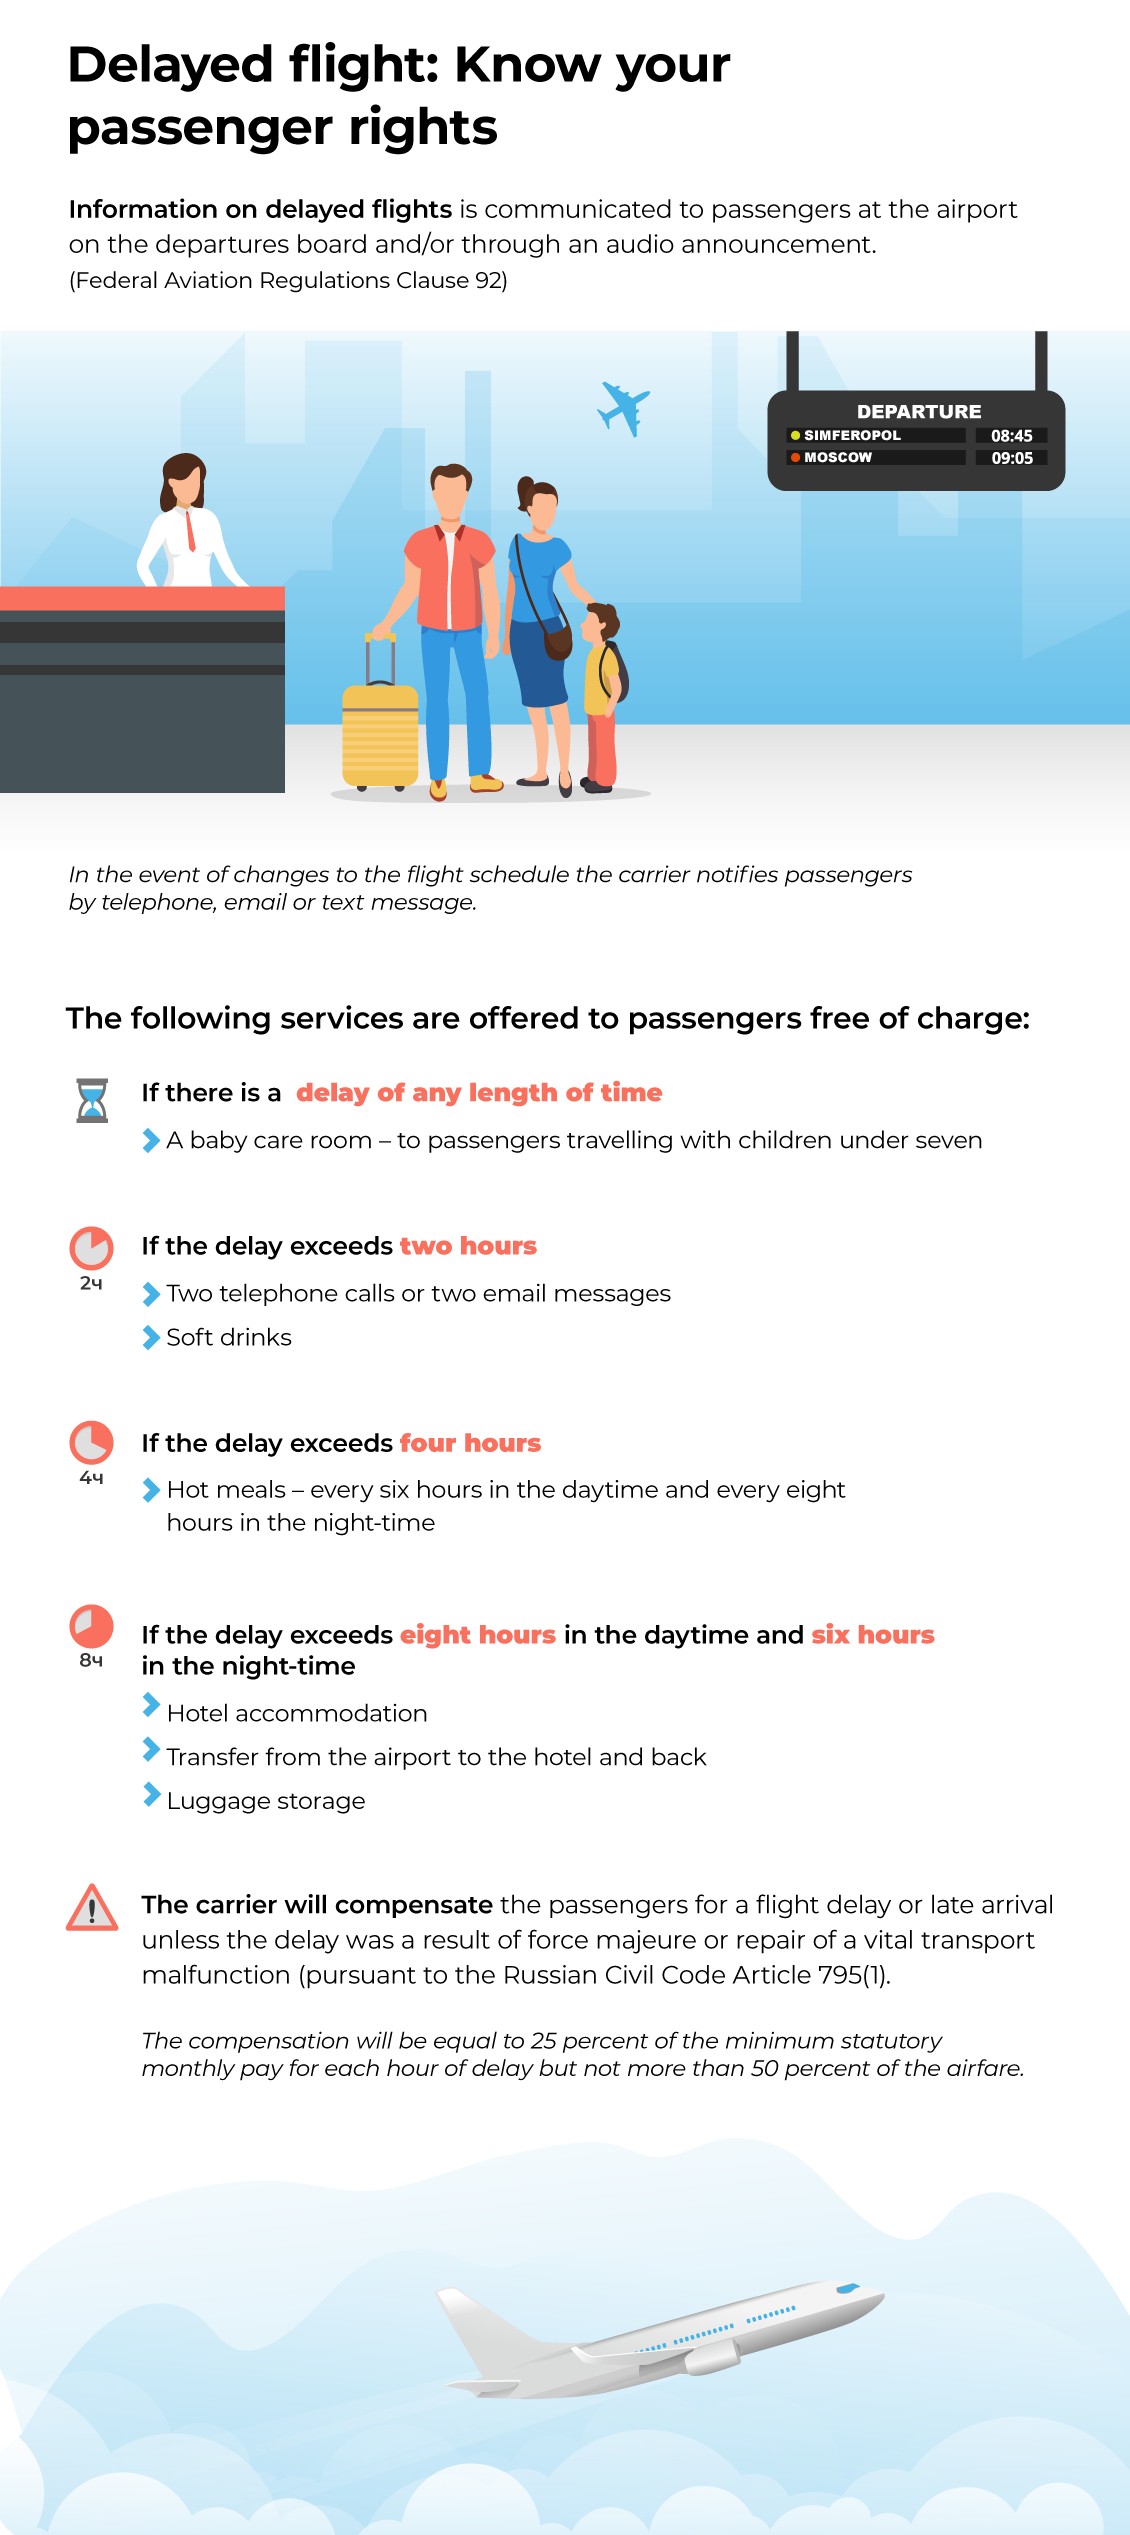 Delayed flight: Know your passenger rights